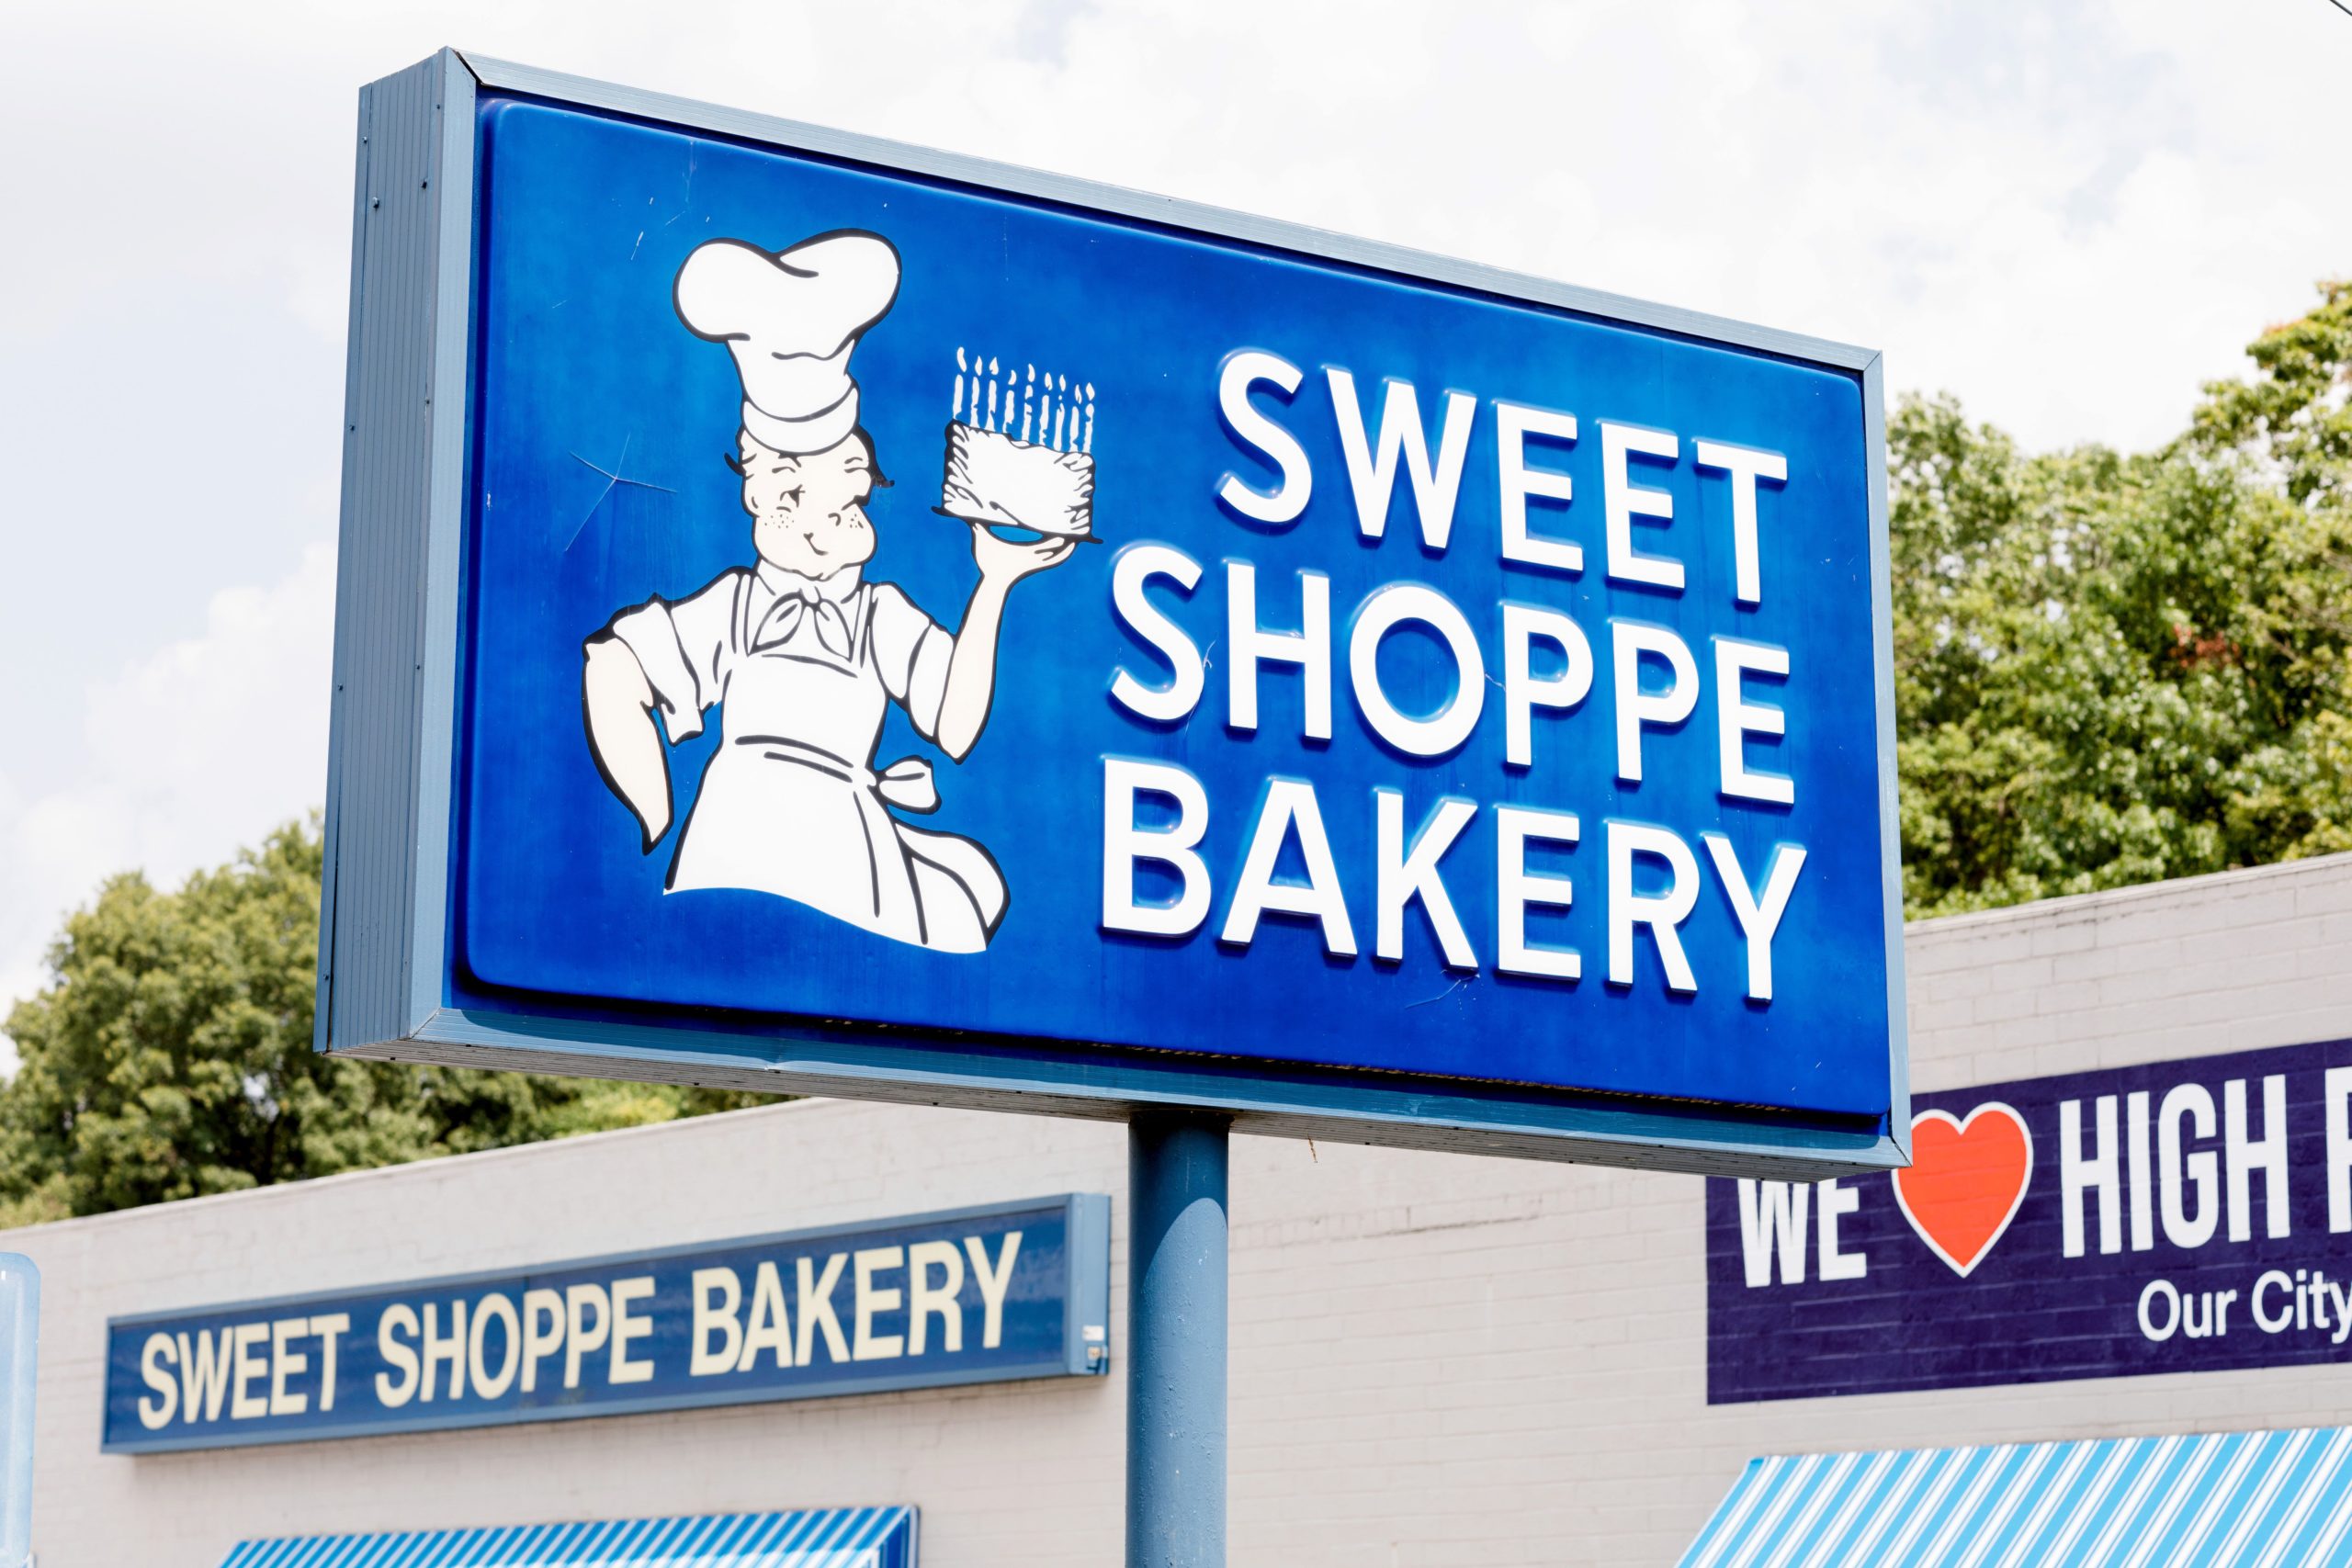 The sign for Sweet Shoppe Bakery in High Point, NC.